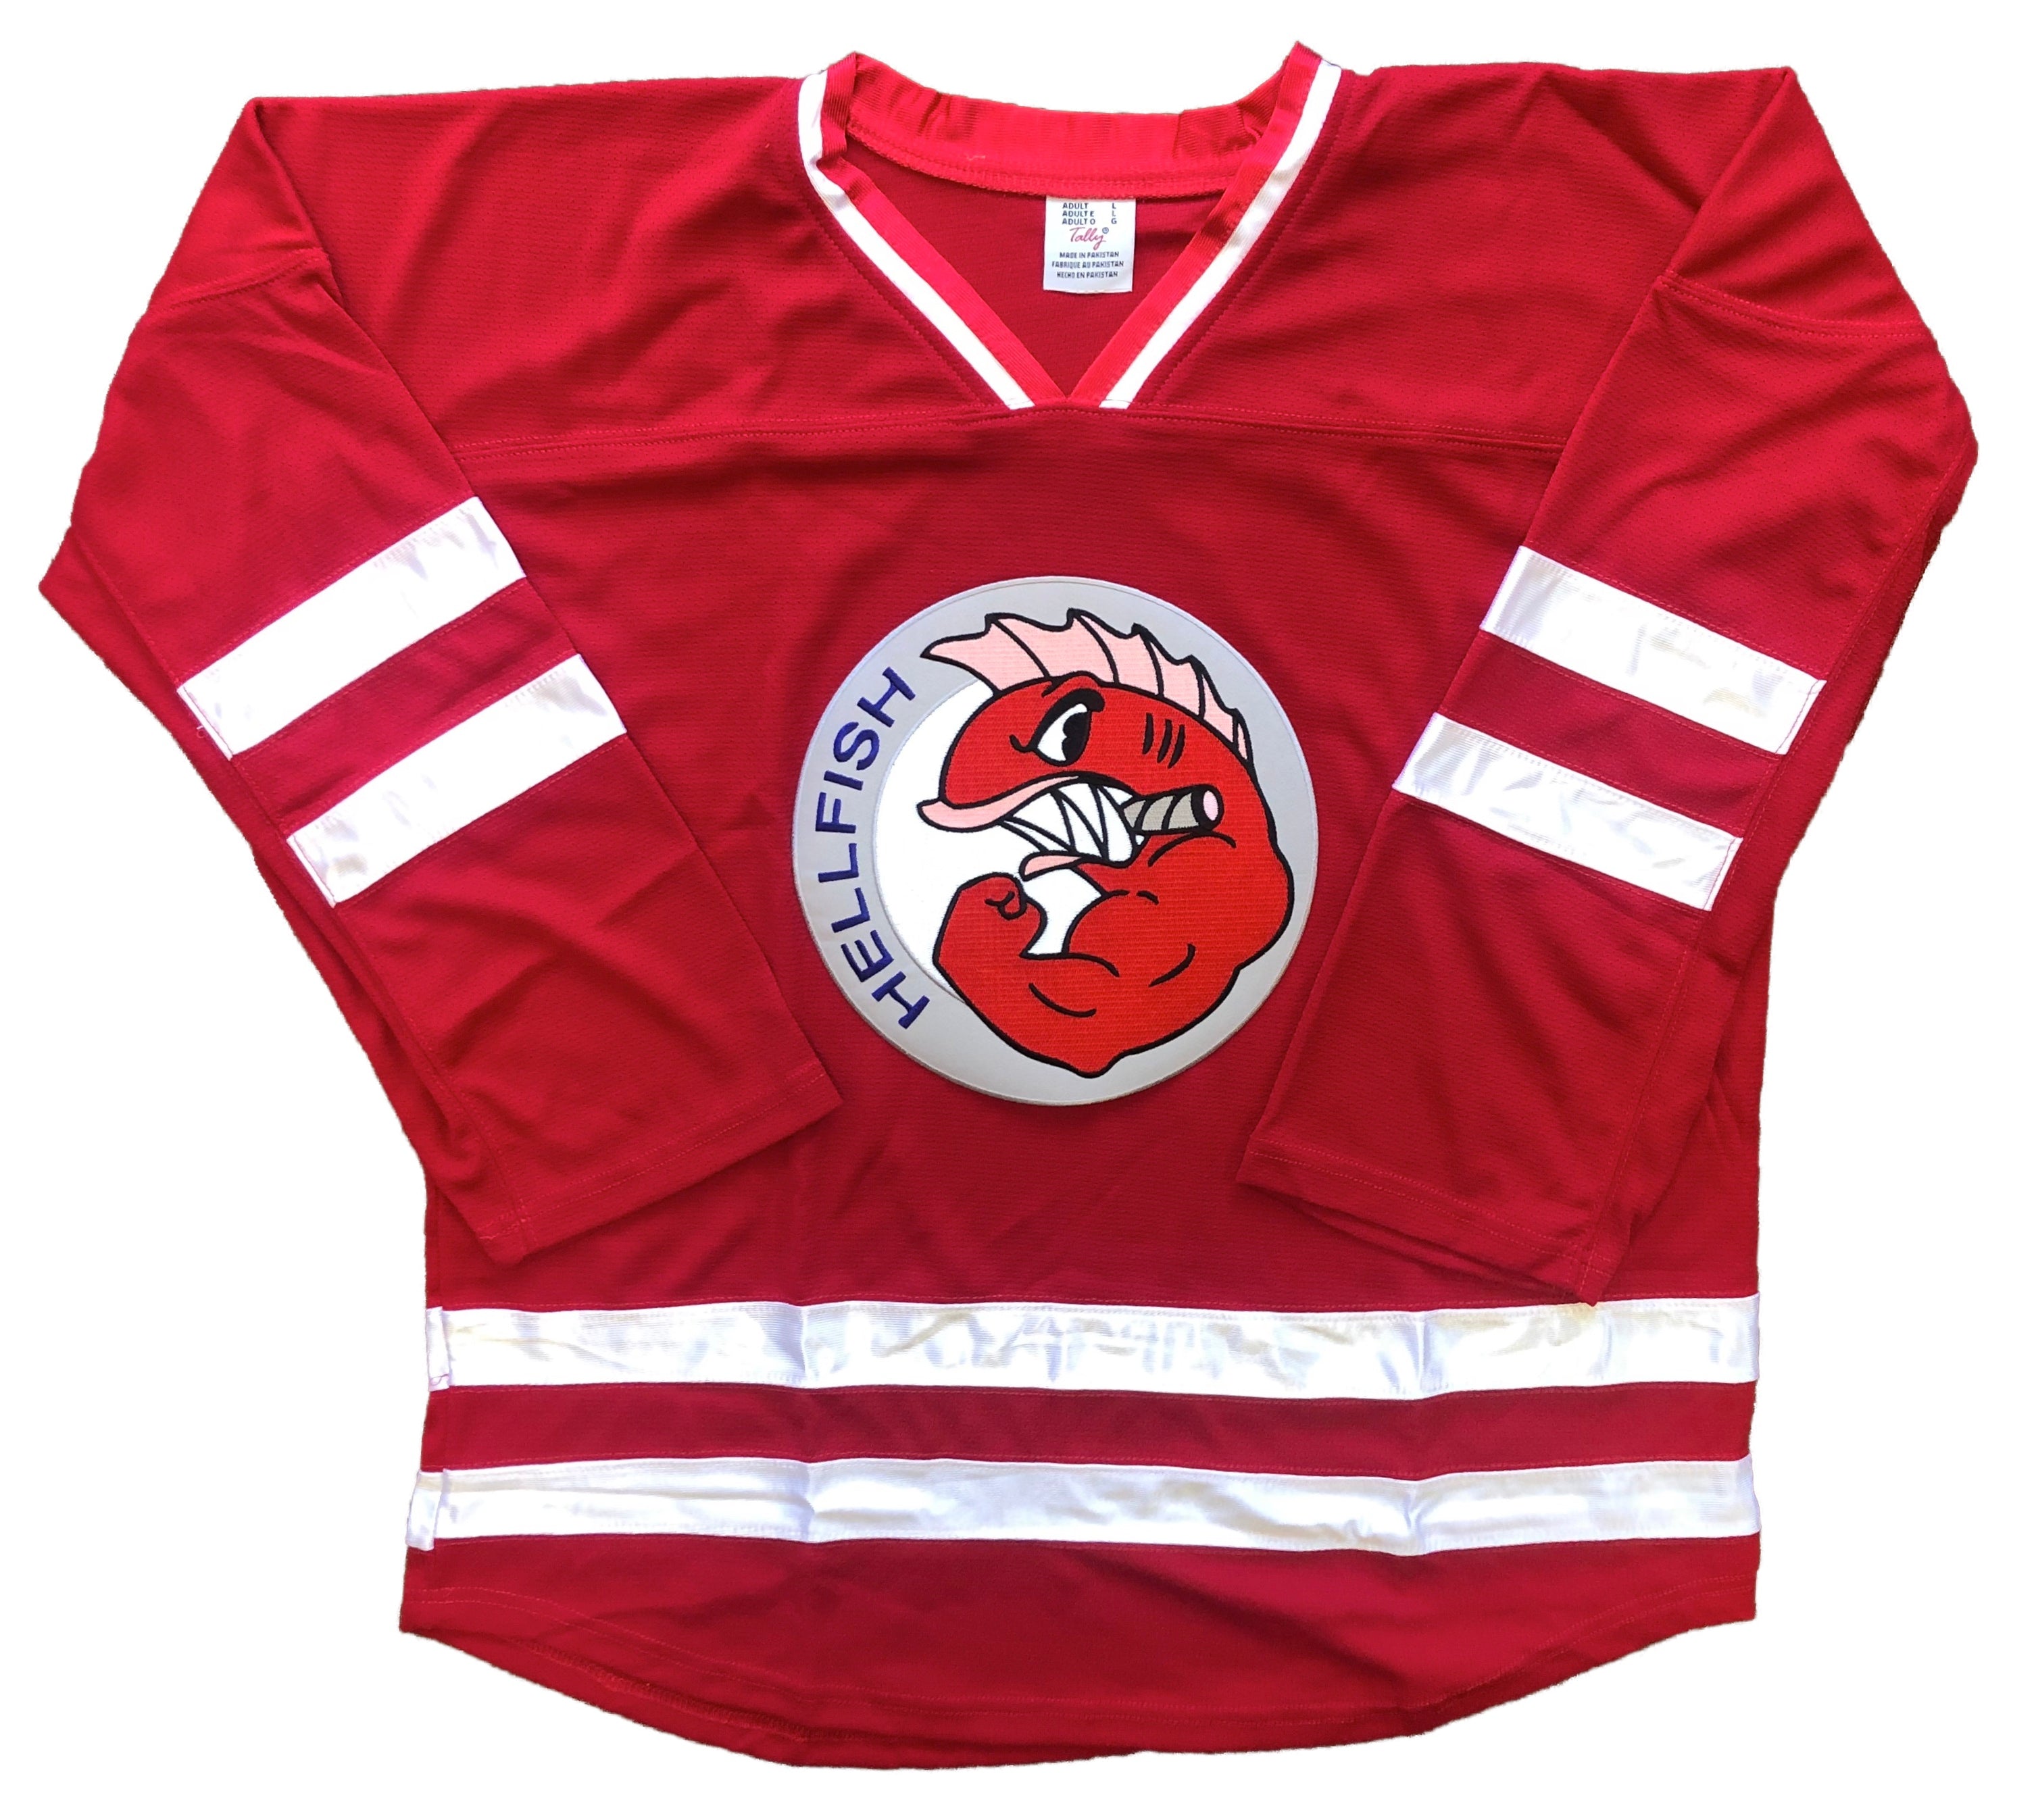 Custom Hockey Jerseys with A Fish Embroidered Twill Logo Adult Goalie Cut / (Just Number) / Blue